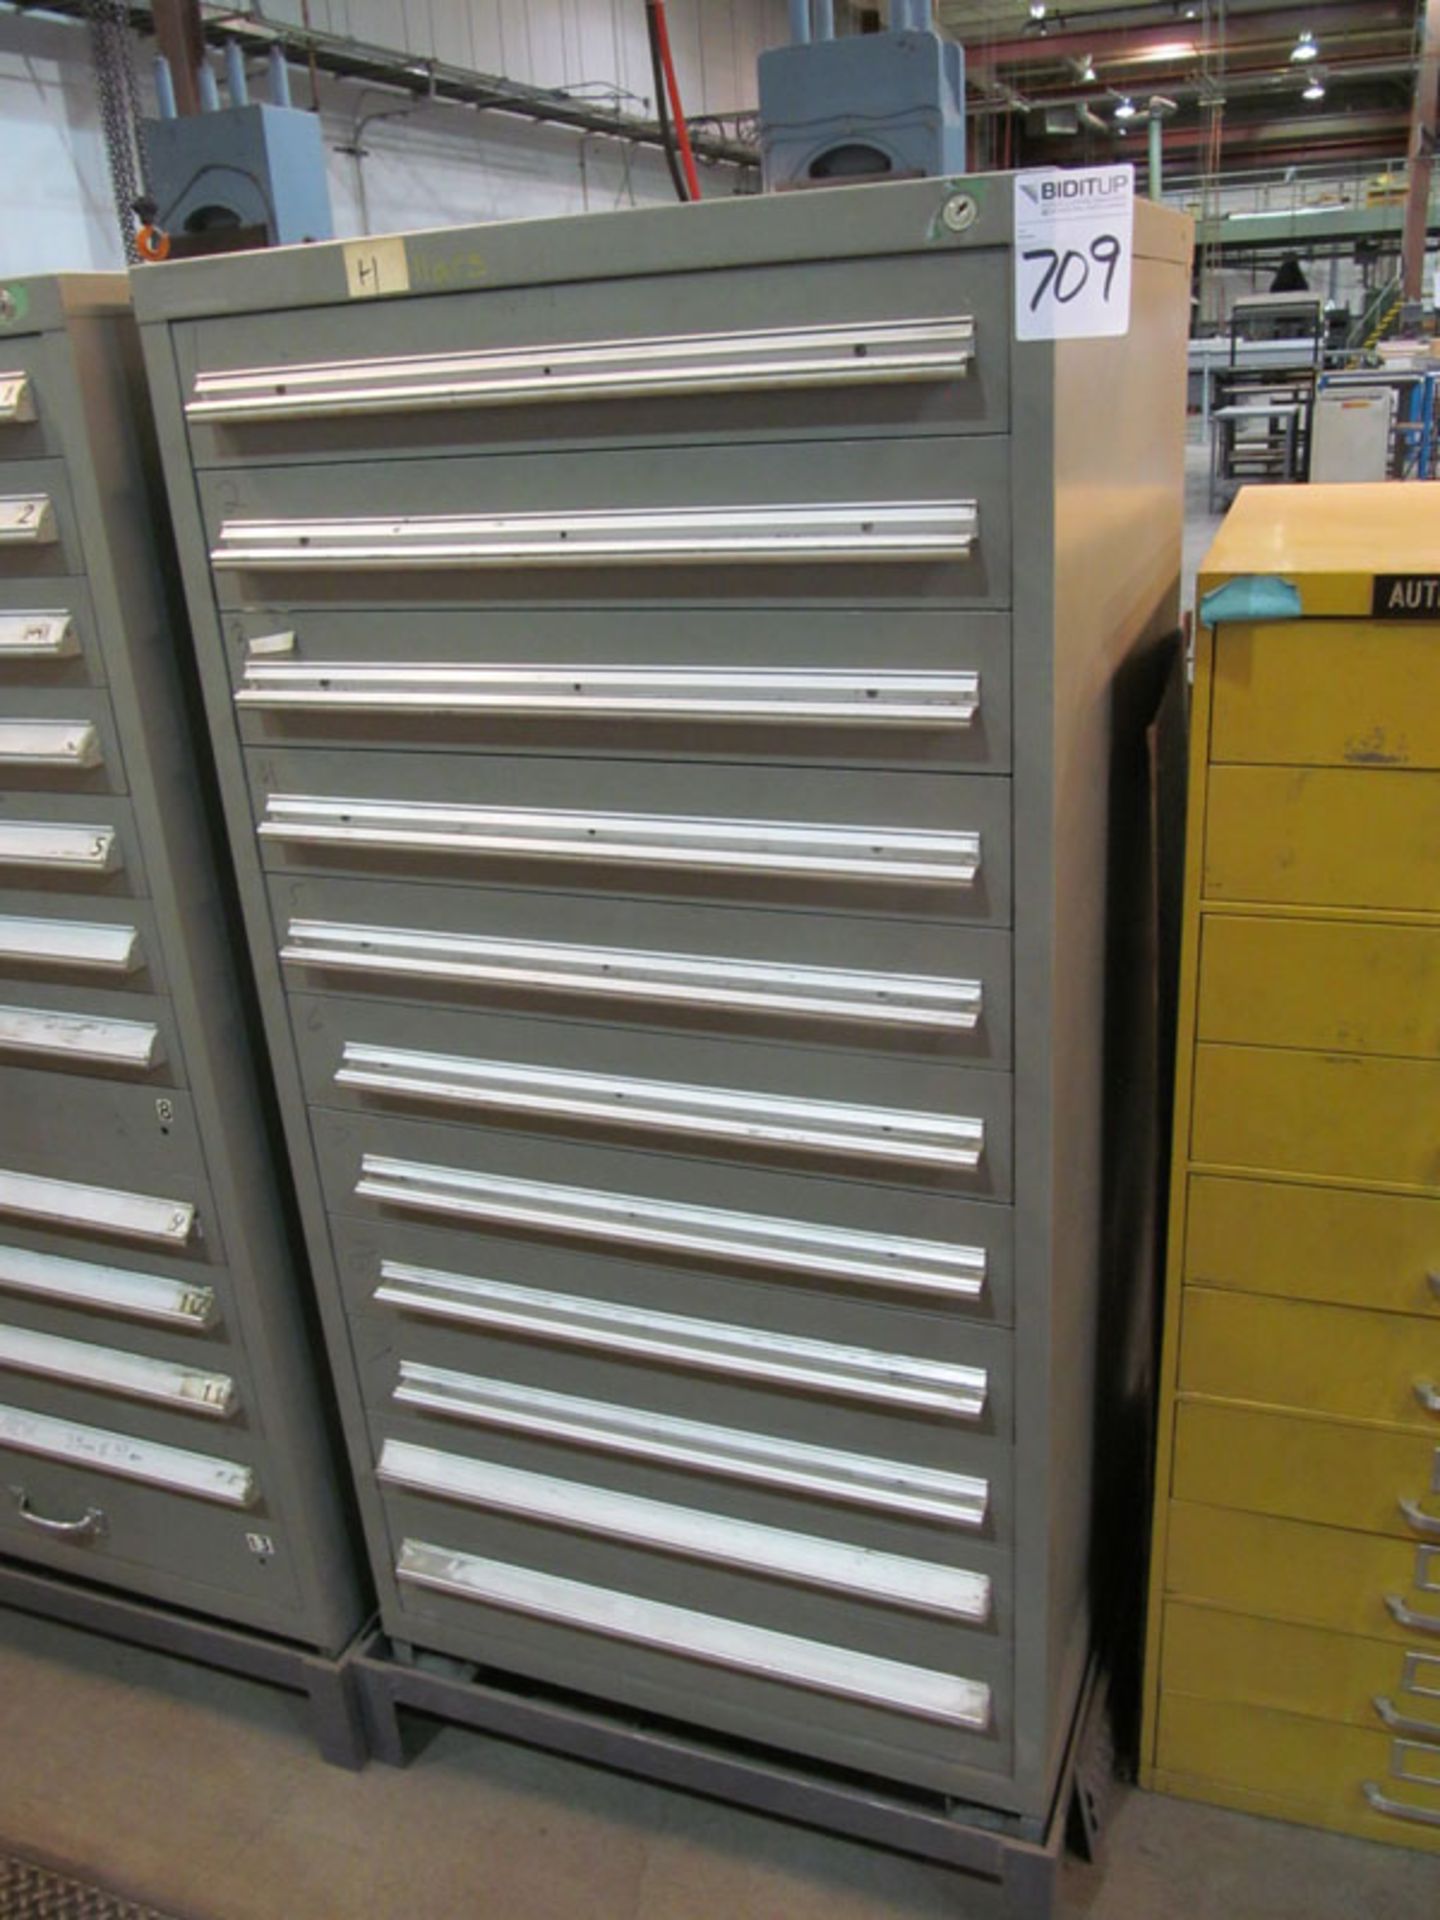 11-Drawer 30" x 28" x 60" High Storage Cabinet (NO CONTENTS), Loading Fee: $25